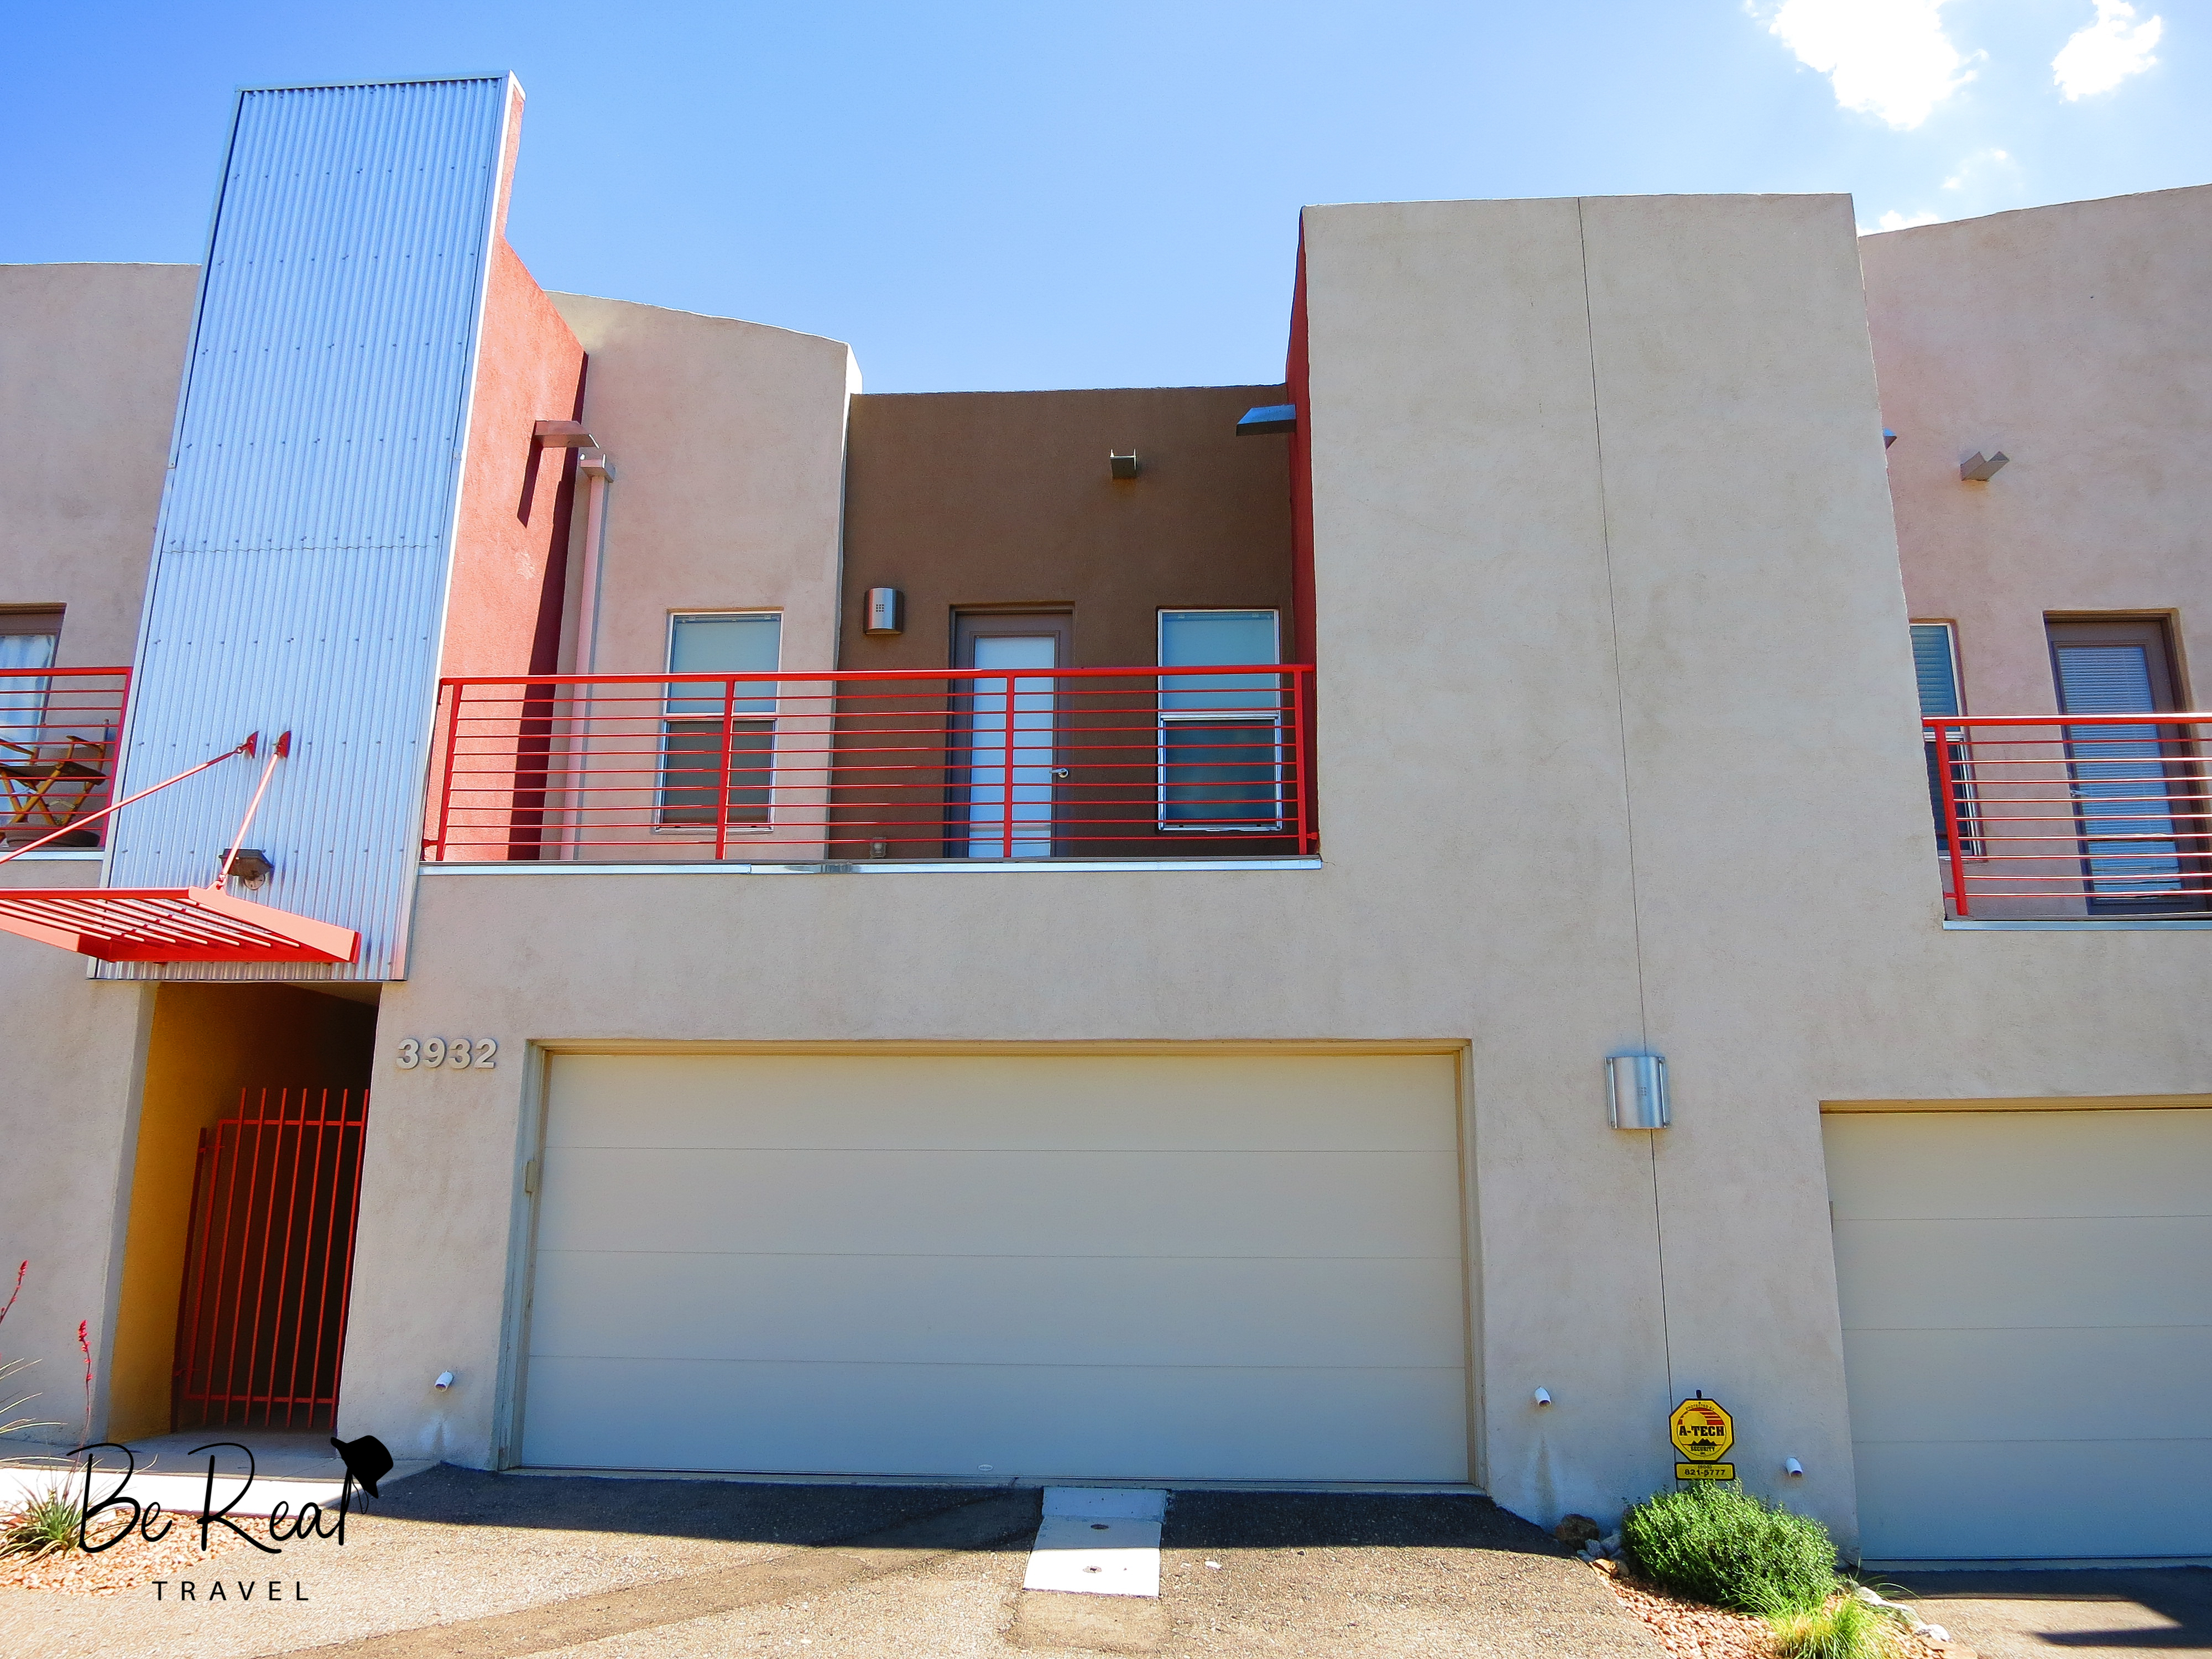 A two story, minimalistic apartment is accented with splashes of red; this apartment was Walter White's bachelor pad in New Mexico Breaking Bad